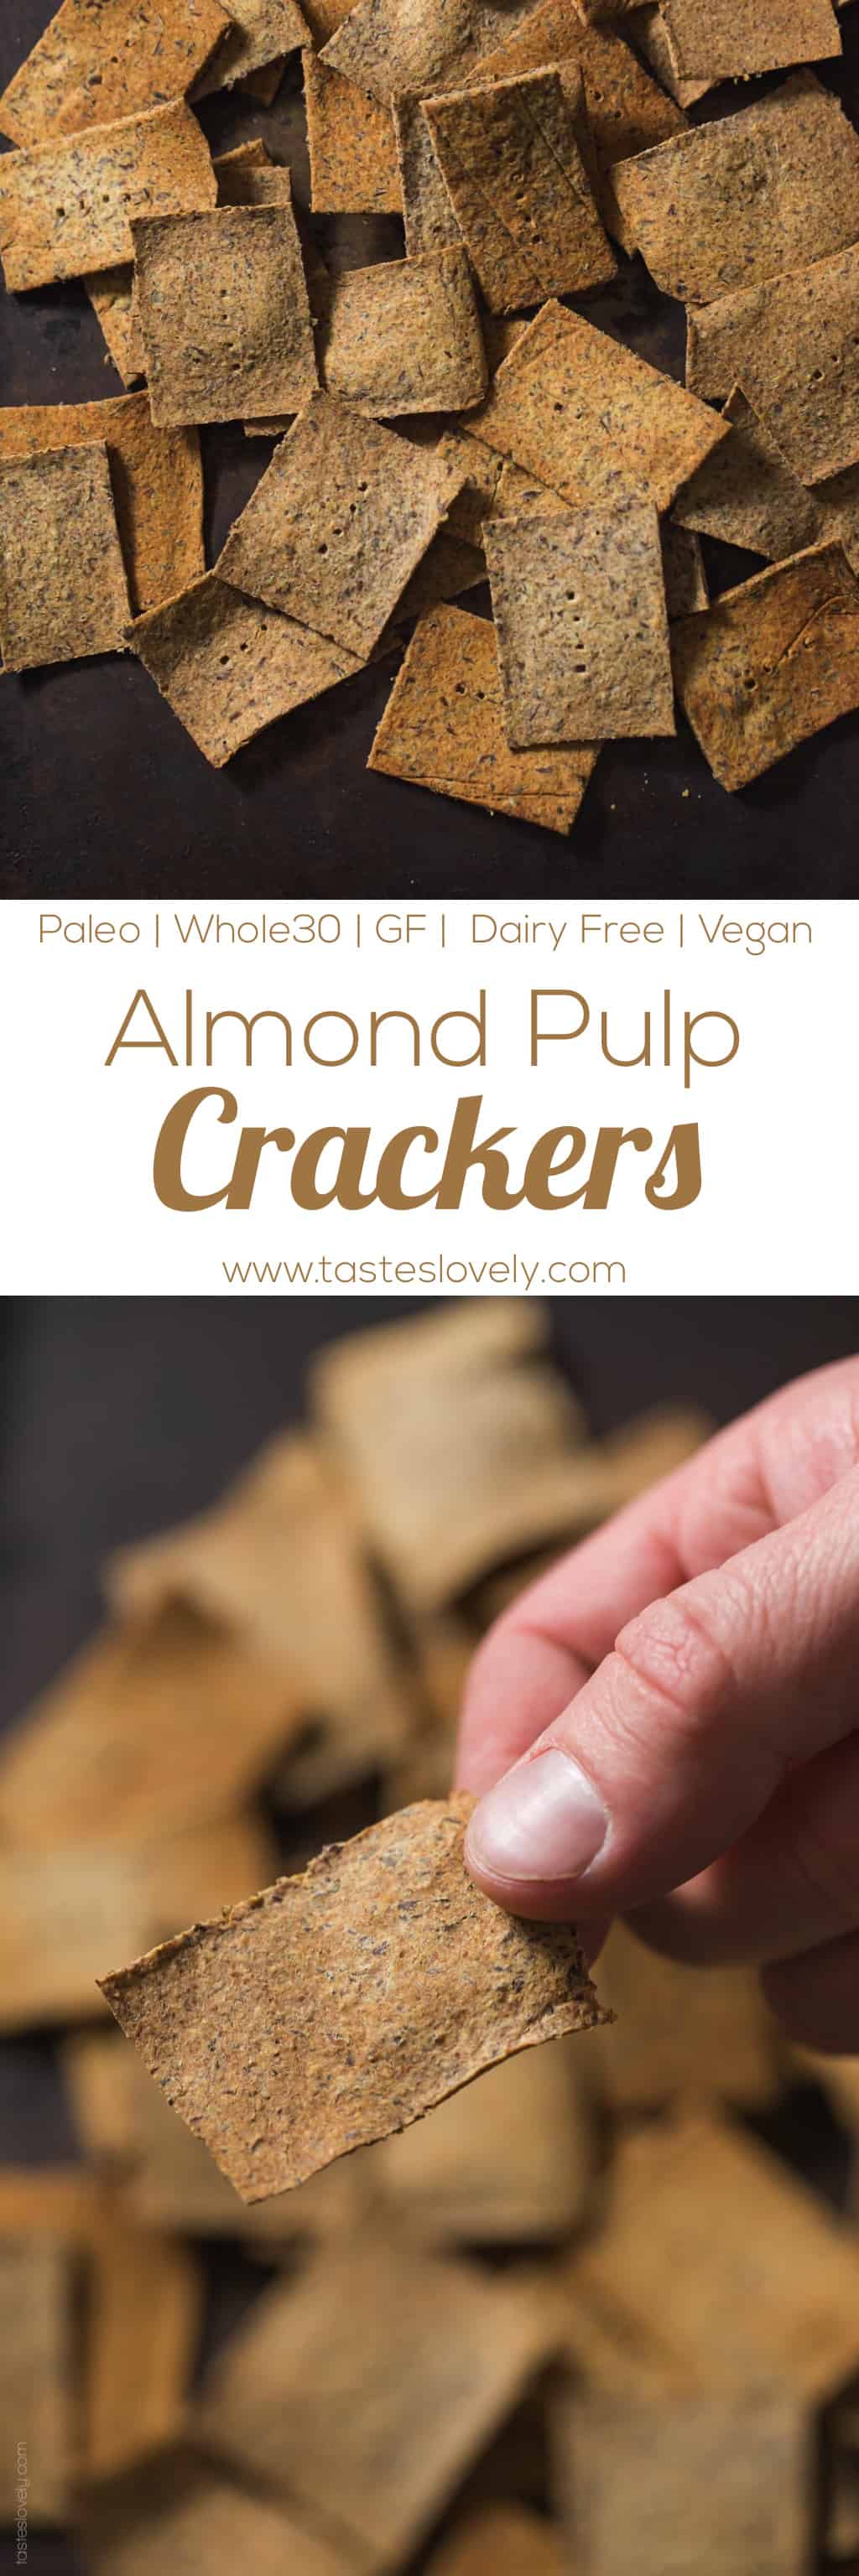 Almond Pulp Crackers made from the leftover almond pulp after making almond milk. (Paleo, Whole30, gluten free, grain free, dairy free, vegan, low carb)